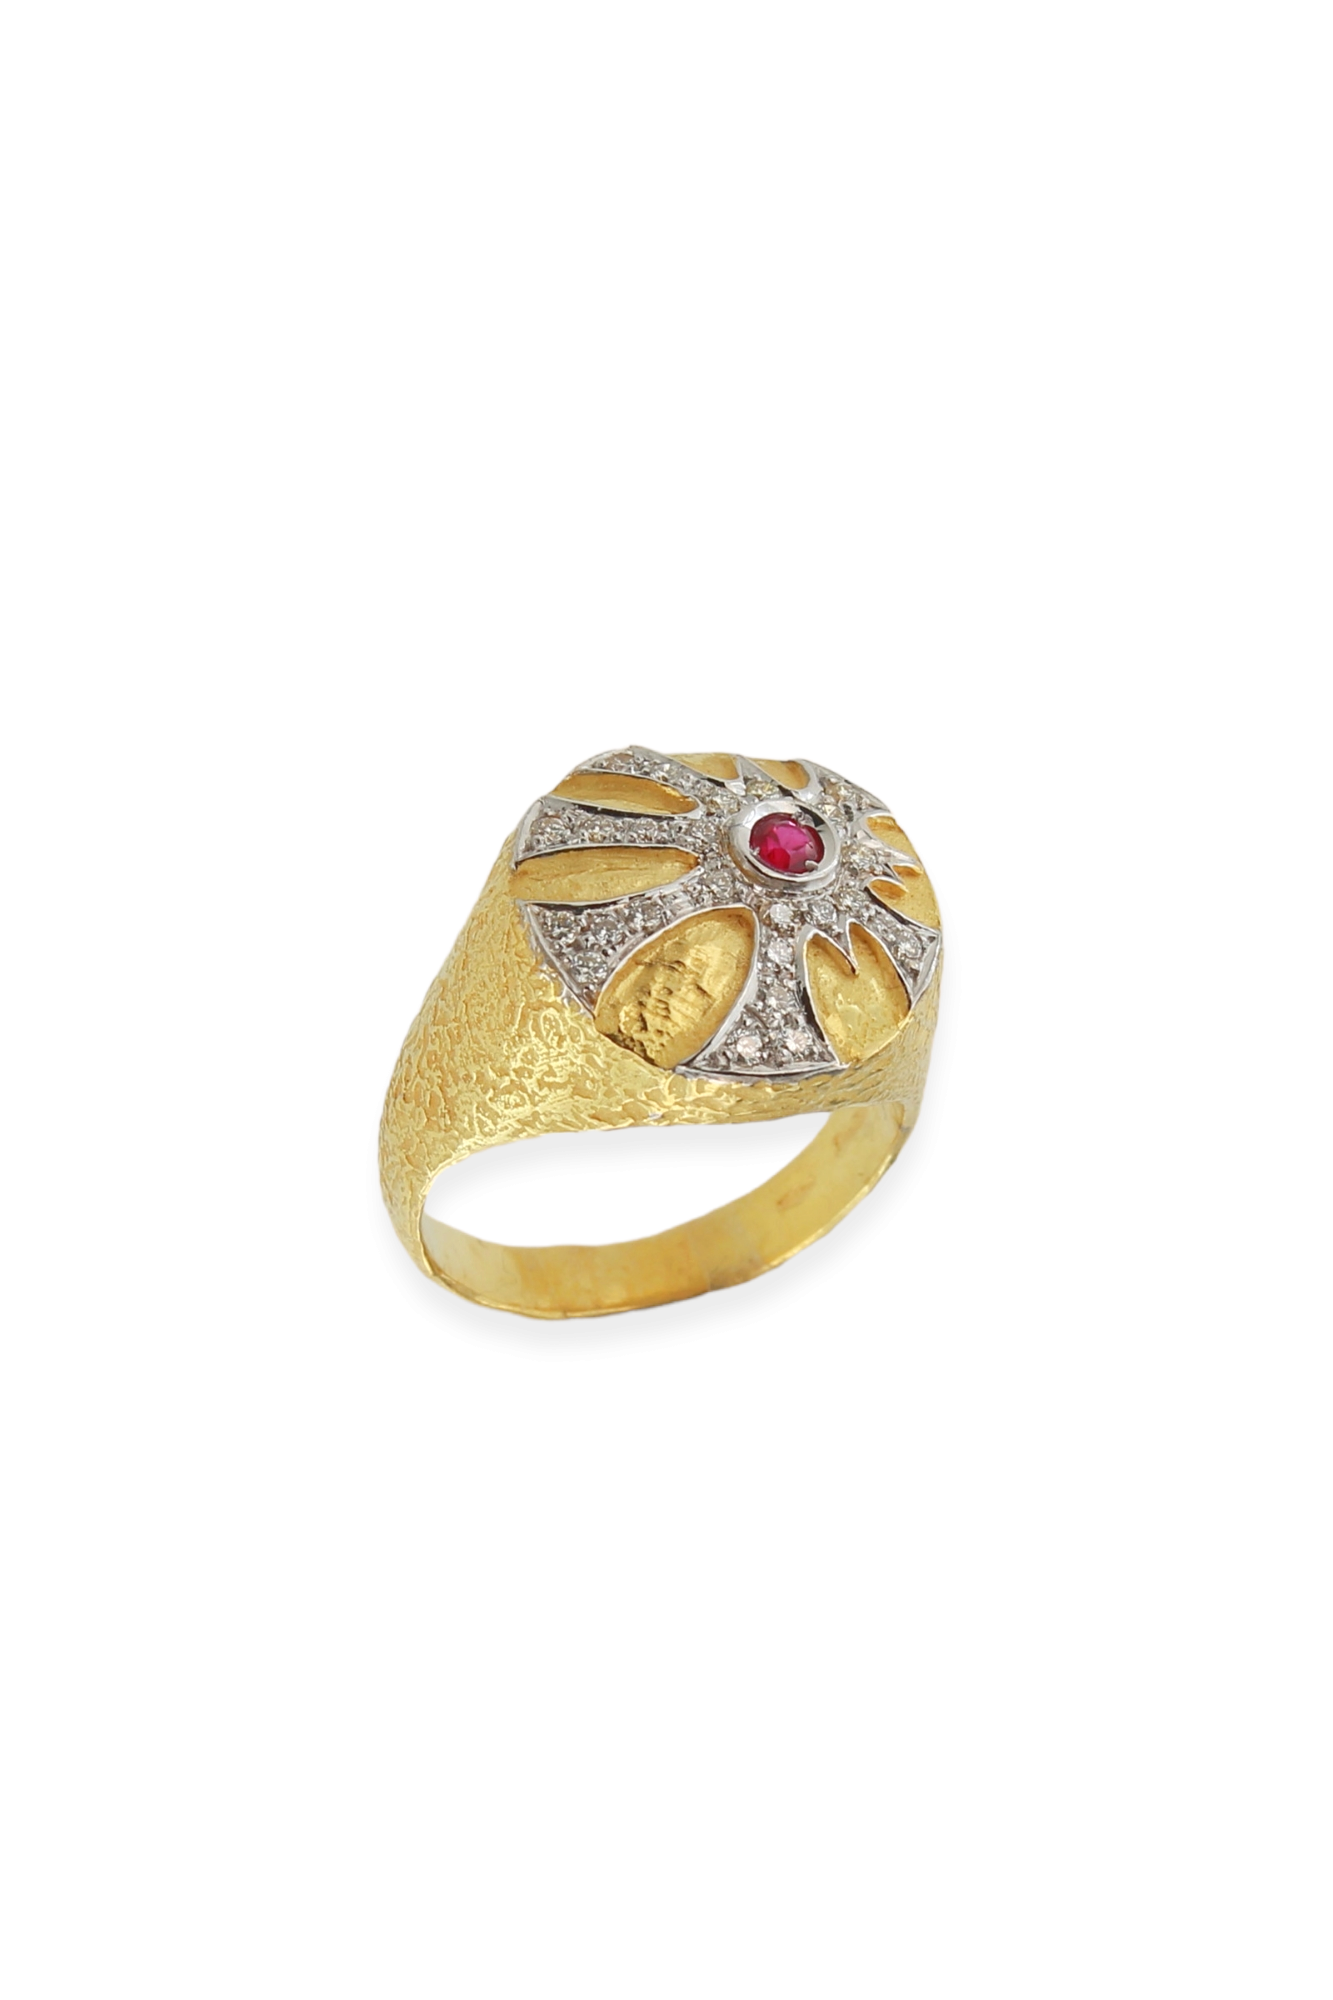 SE261B-18-Kt-Yellow-Gold-Signet-Ring-with-Ruby-and-Diamonds-1